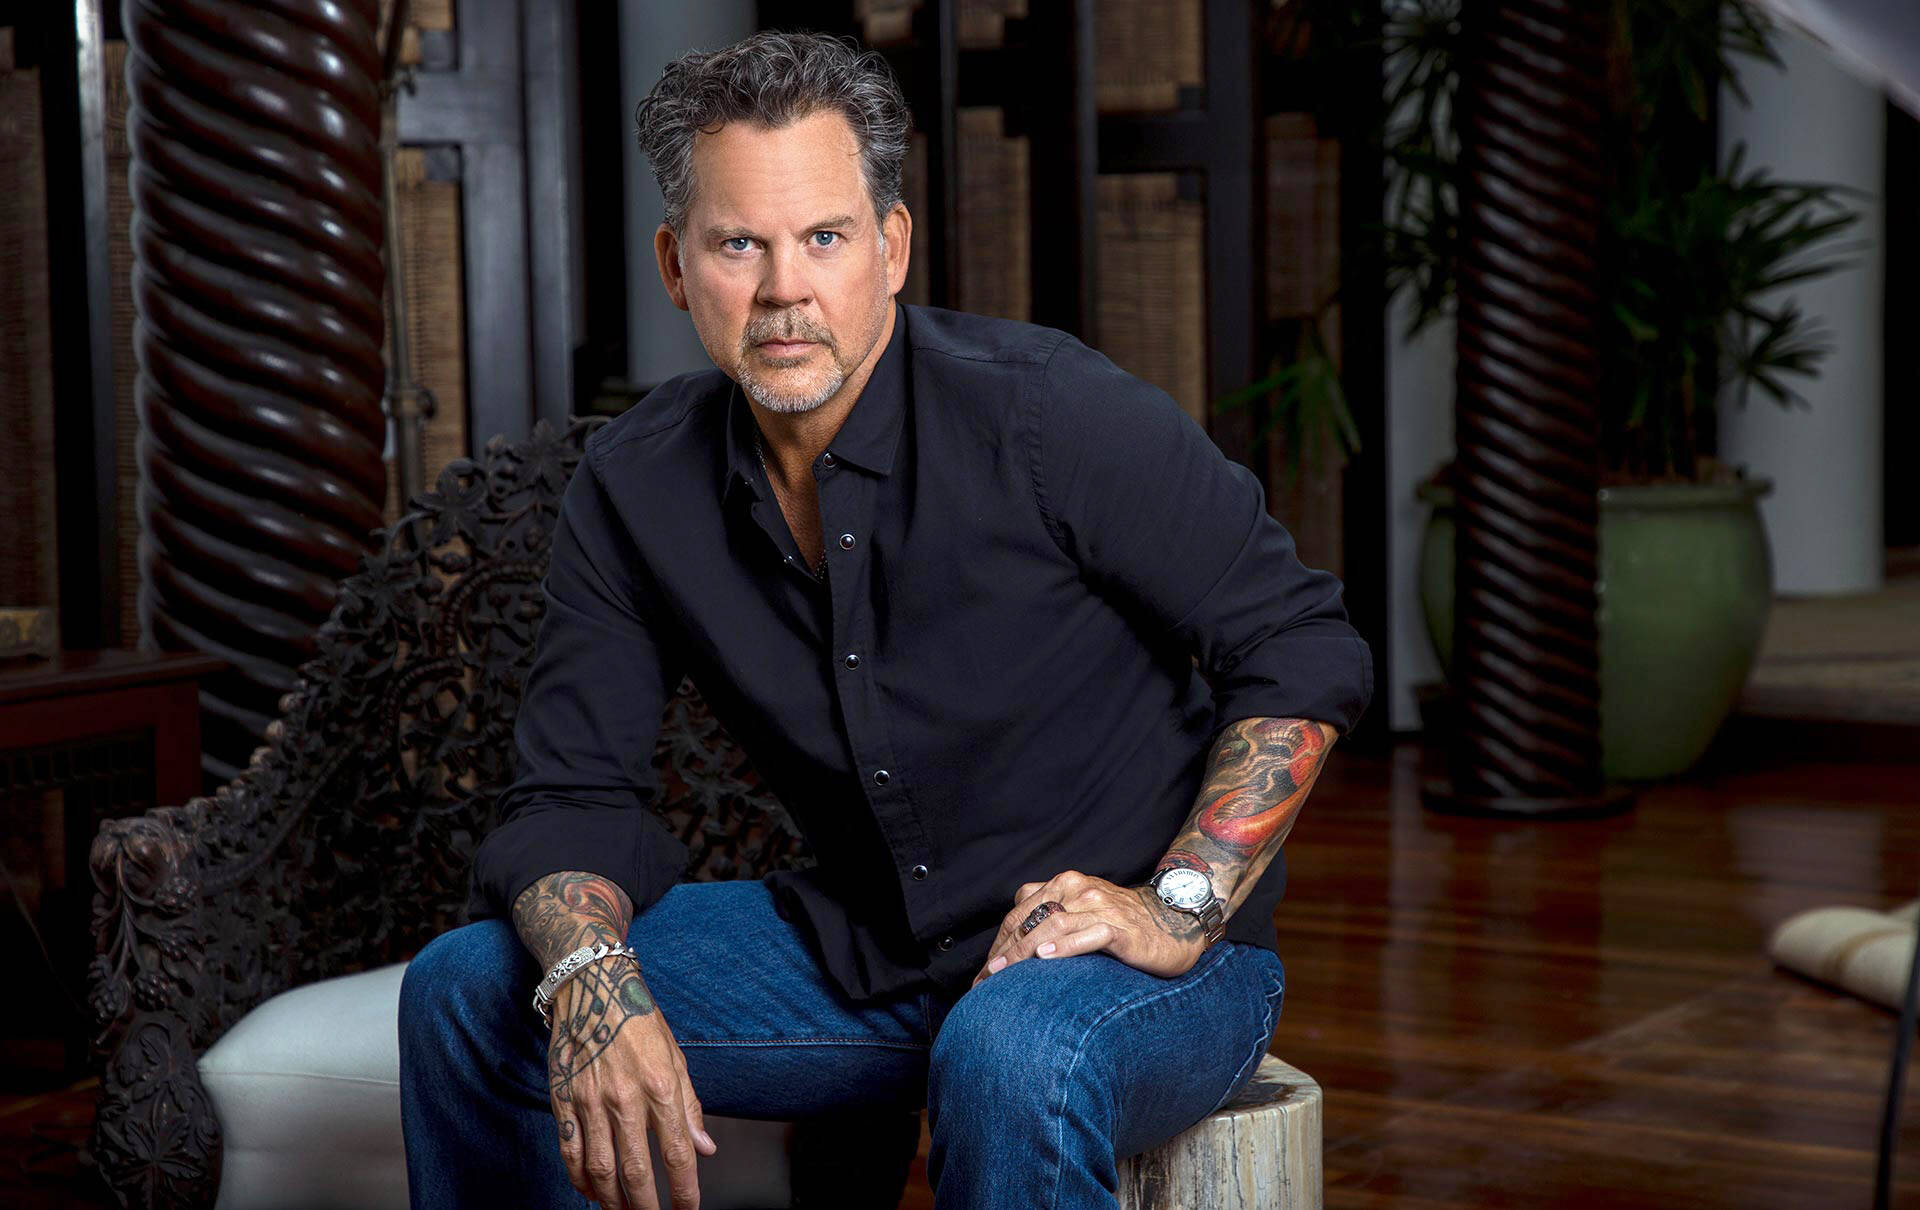 Gary Allan will perform Jan. 13 at the accesso ShoWare Center in Kent. COURTESY PHOTO, Gary Allan